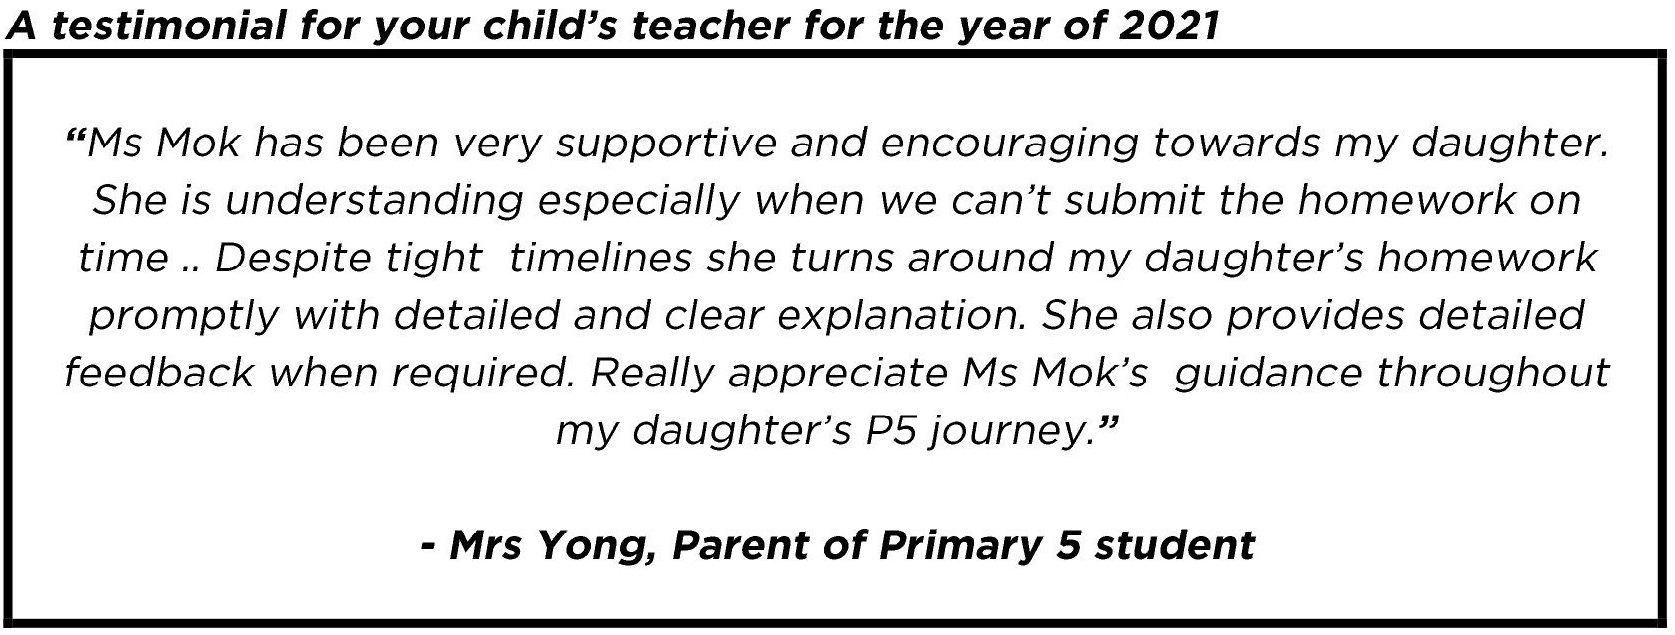 "...very supportive and encouraging towards my daughter."